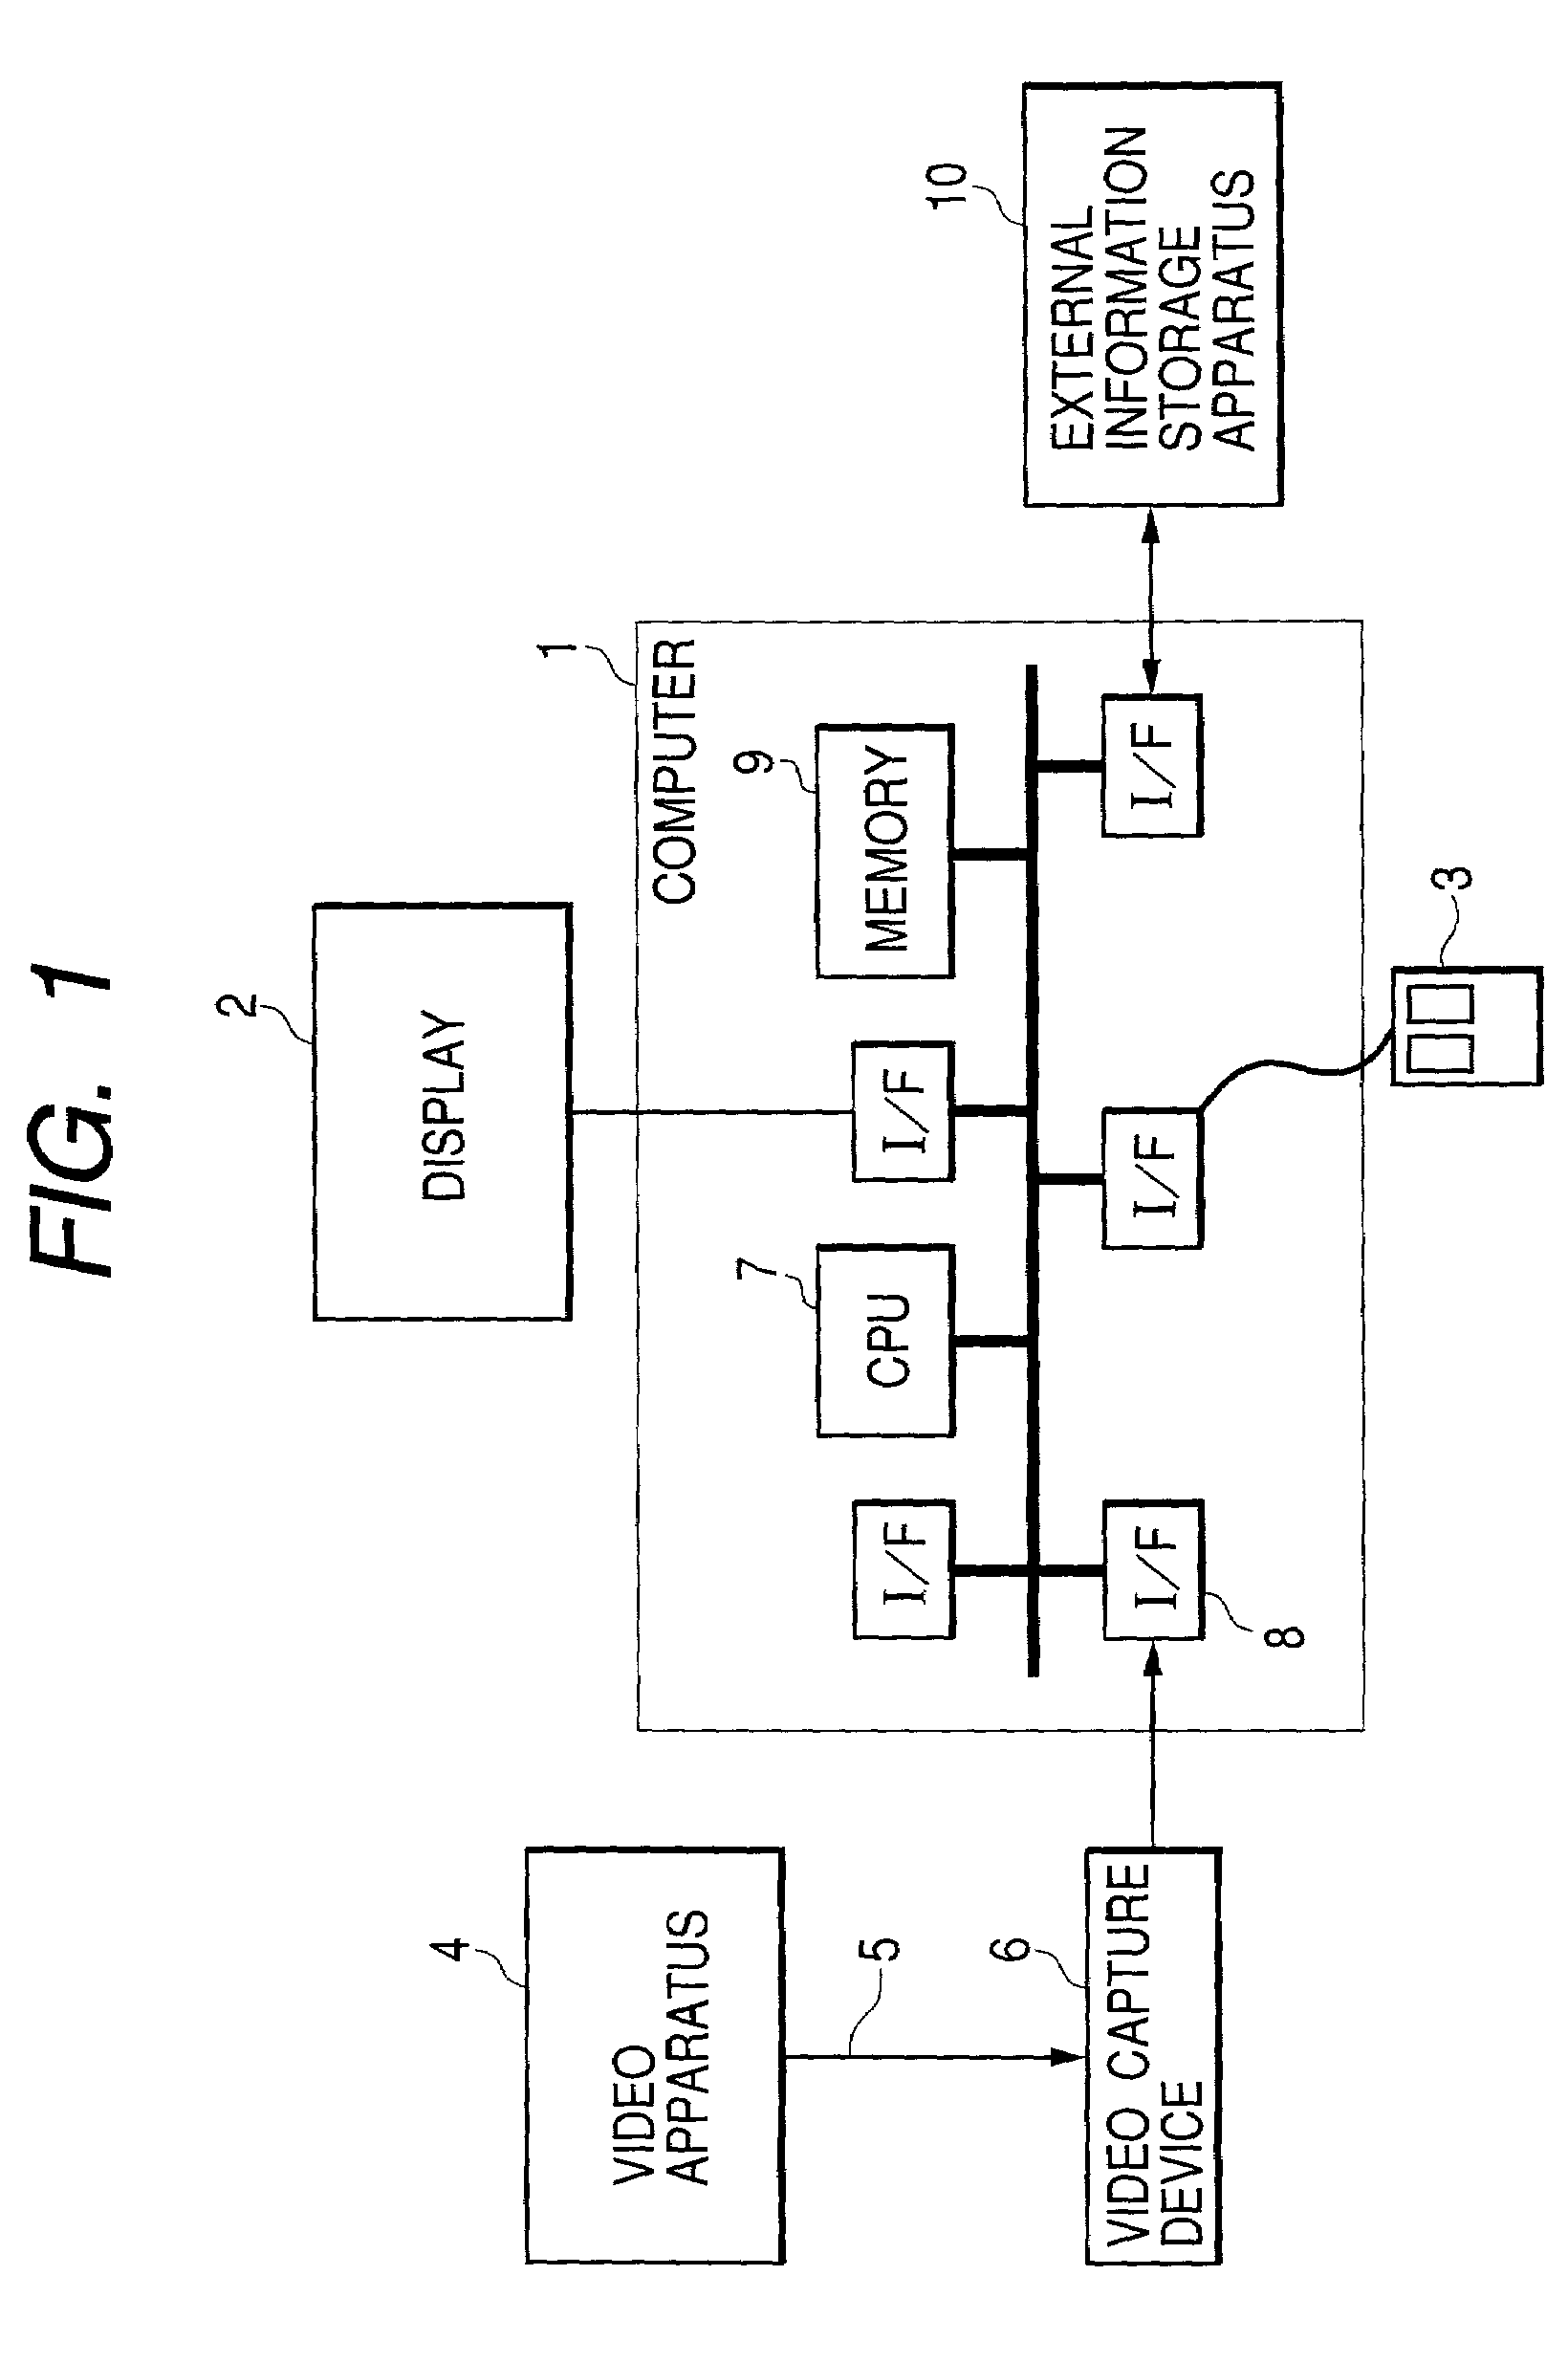 Method and apparatus for character string search in image